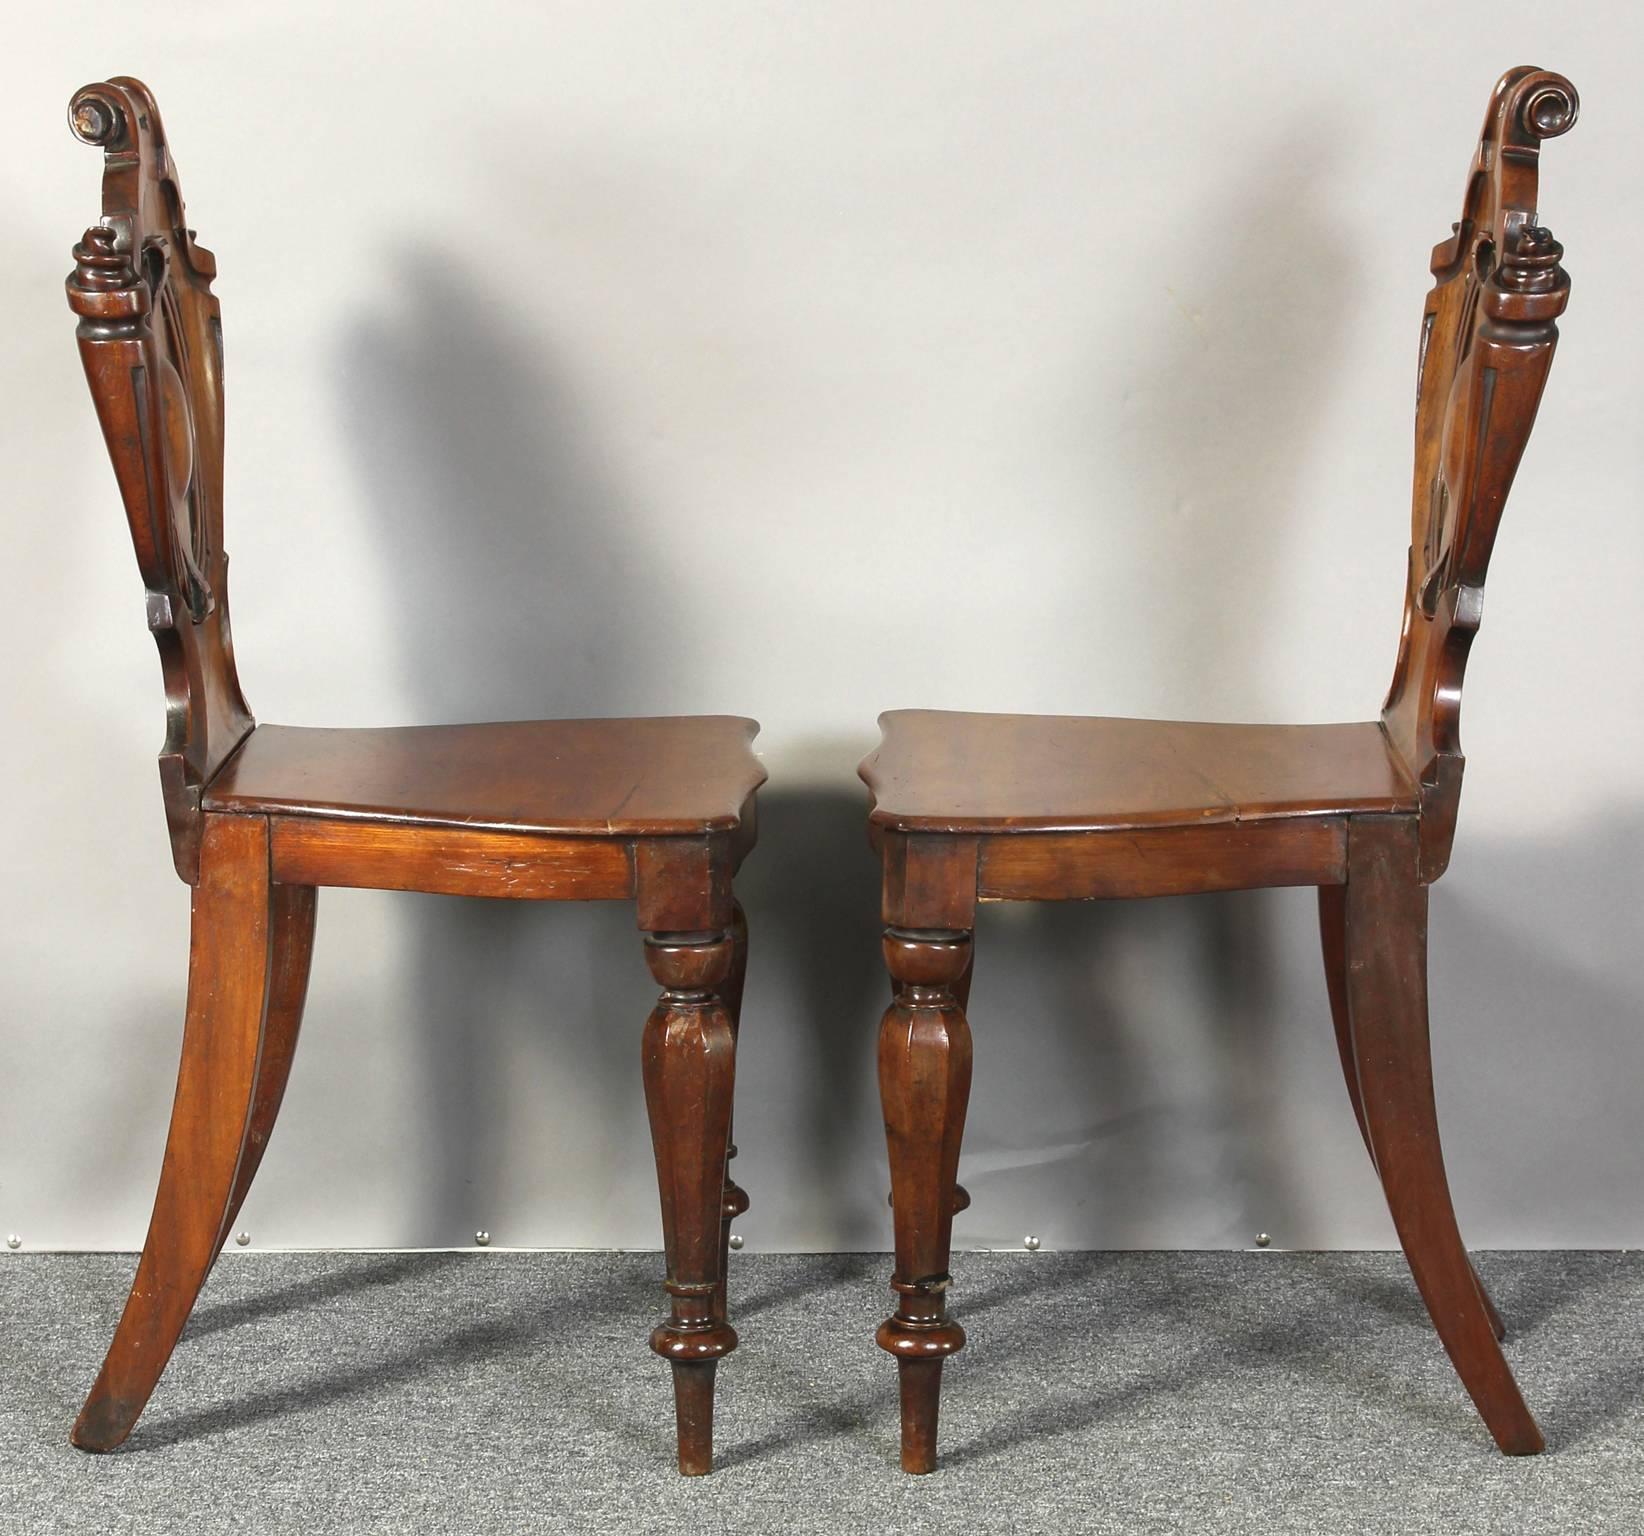 Mid-19th Century Pair of English William IV Carved Mahogany Hall Chairs